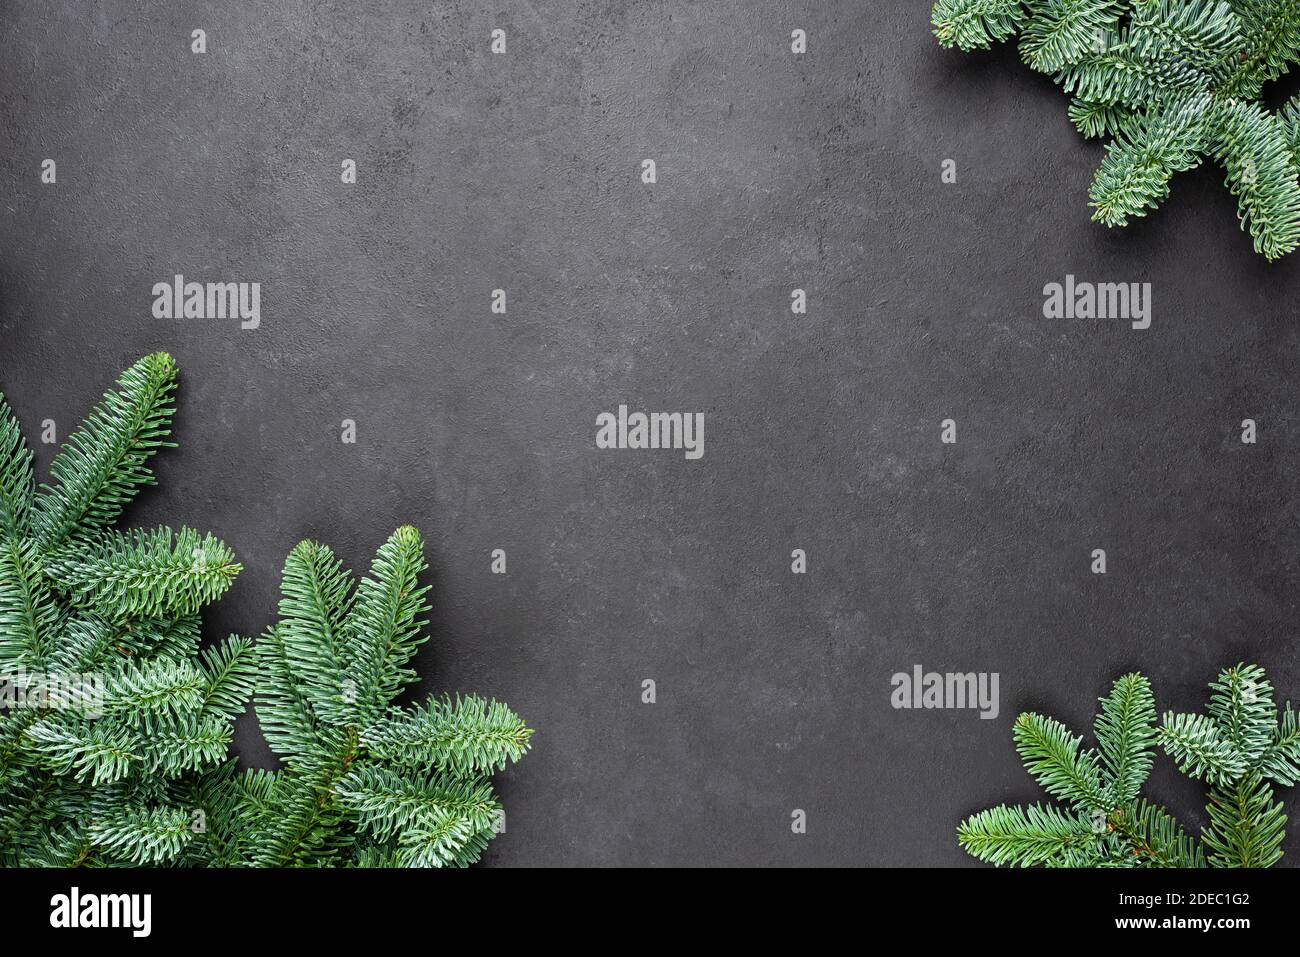 Christmas frame background with fir tree on black concrete background. Design mock up Stock Photo